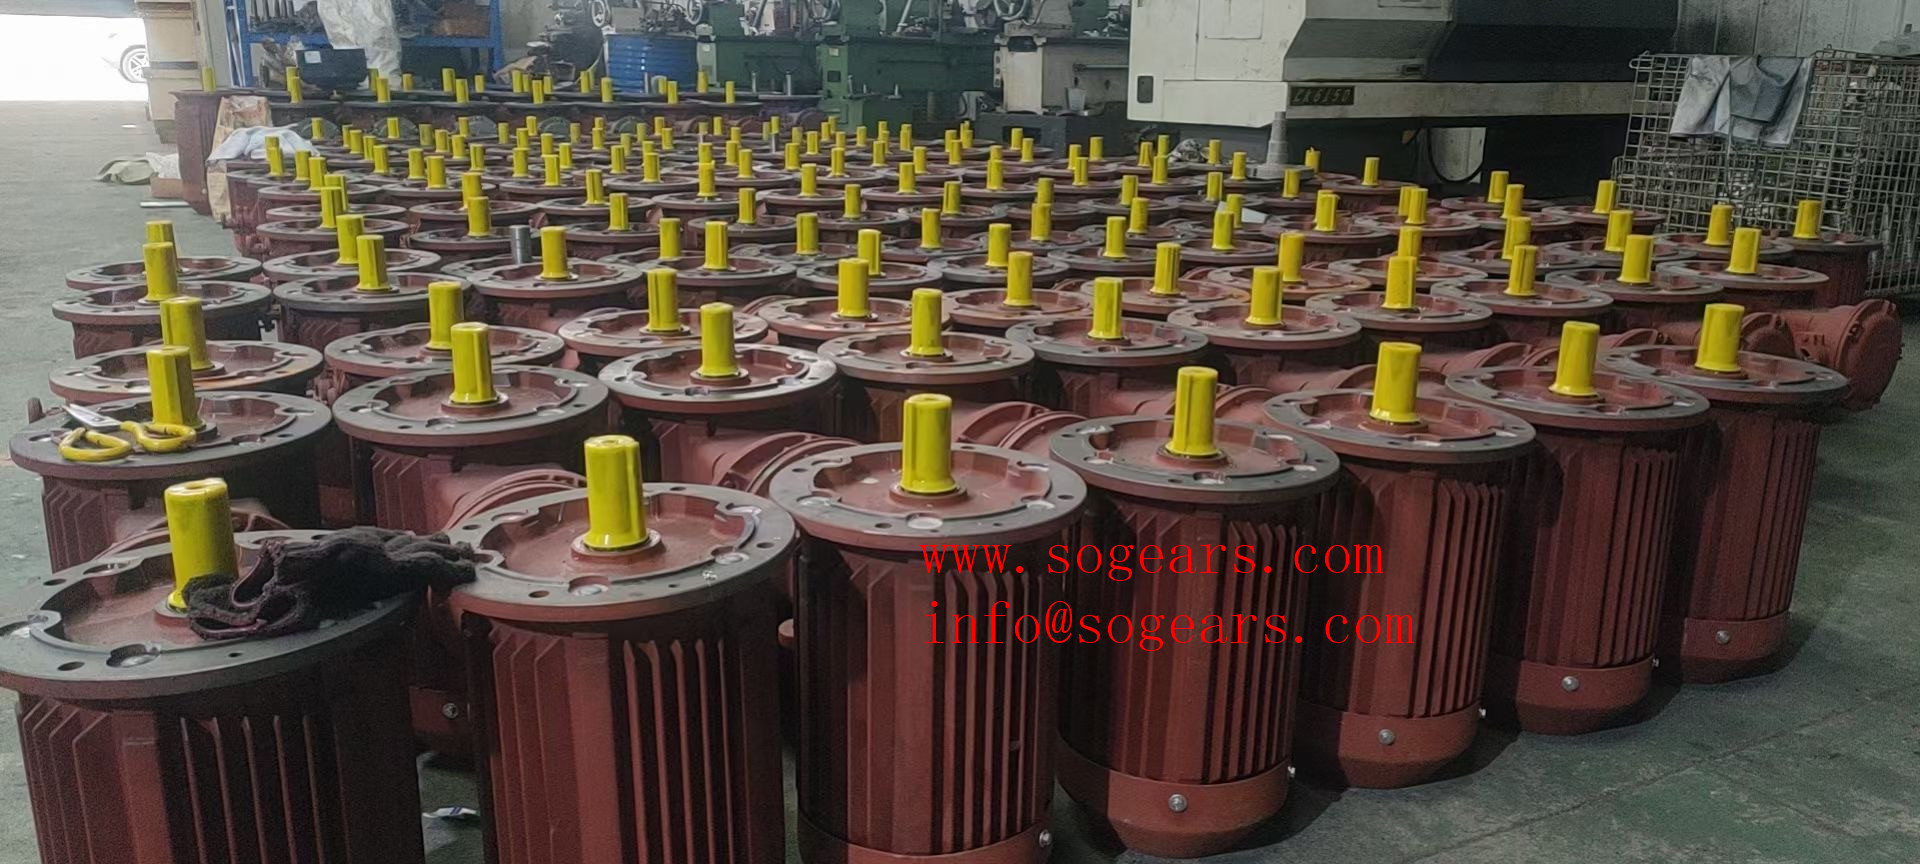 leadmanufacturer de situla rota gearbox in chinaing